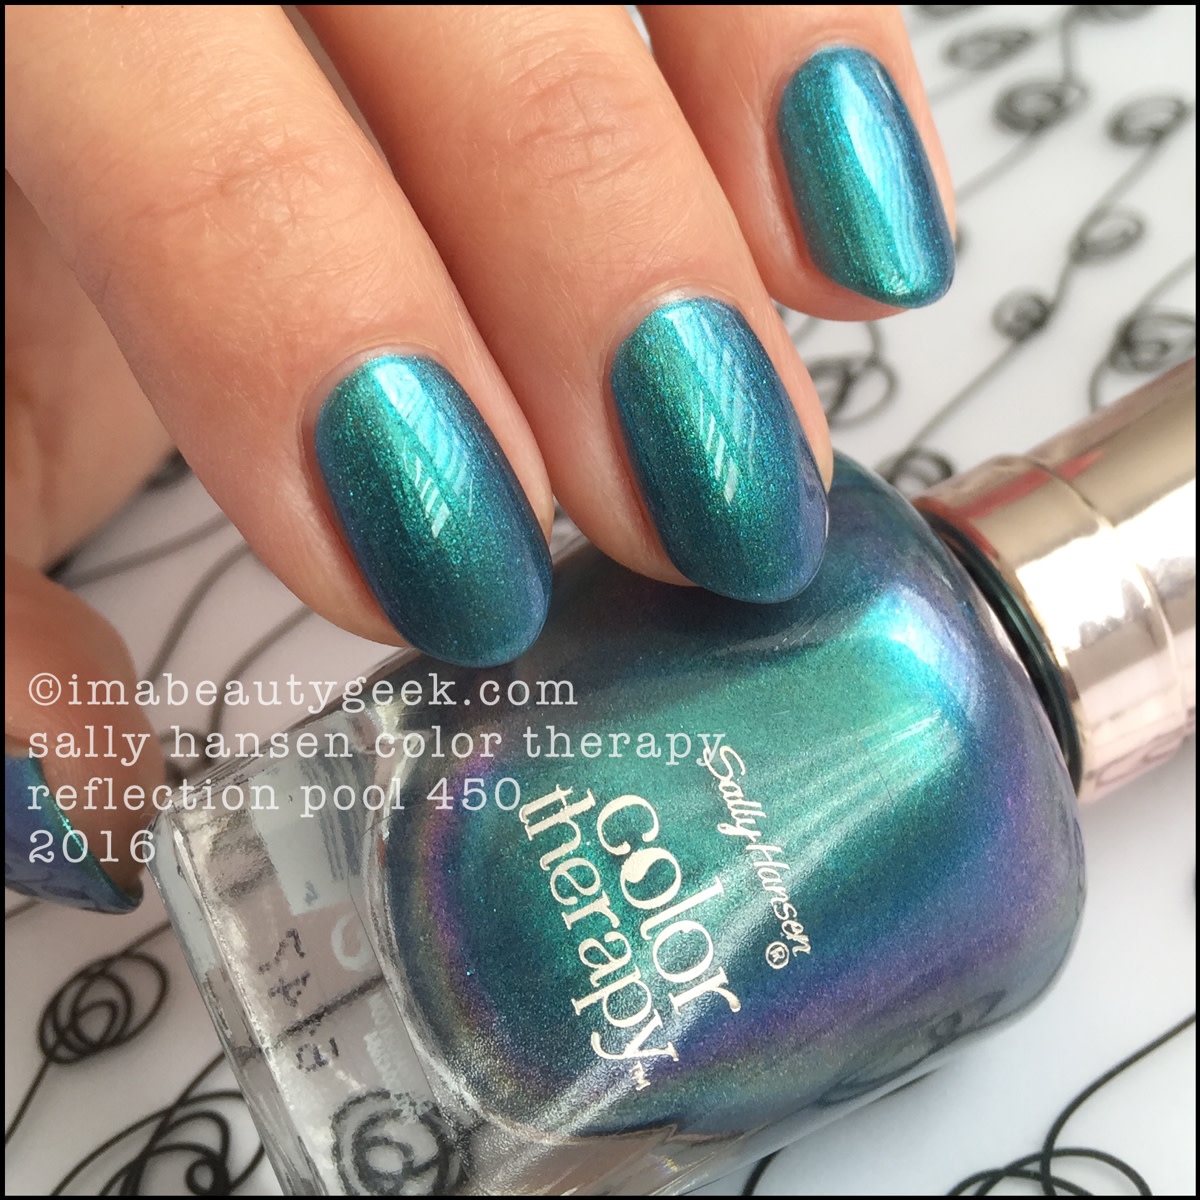 Sally Hansen Color Therapy Reflection Pool 450